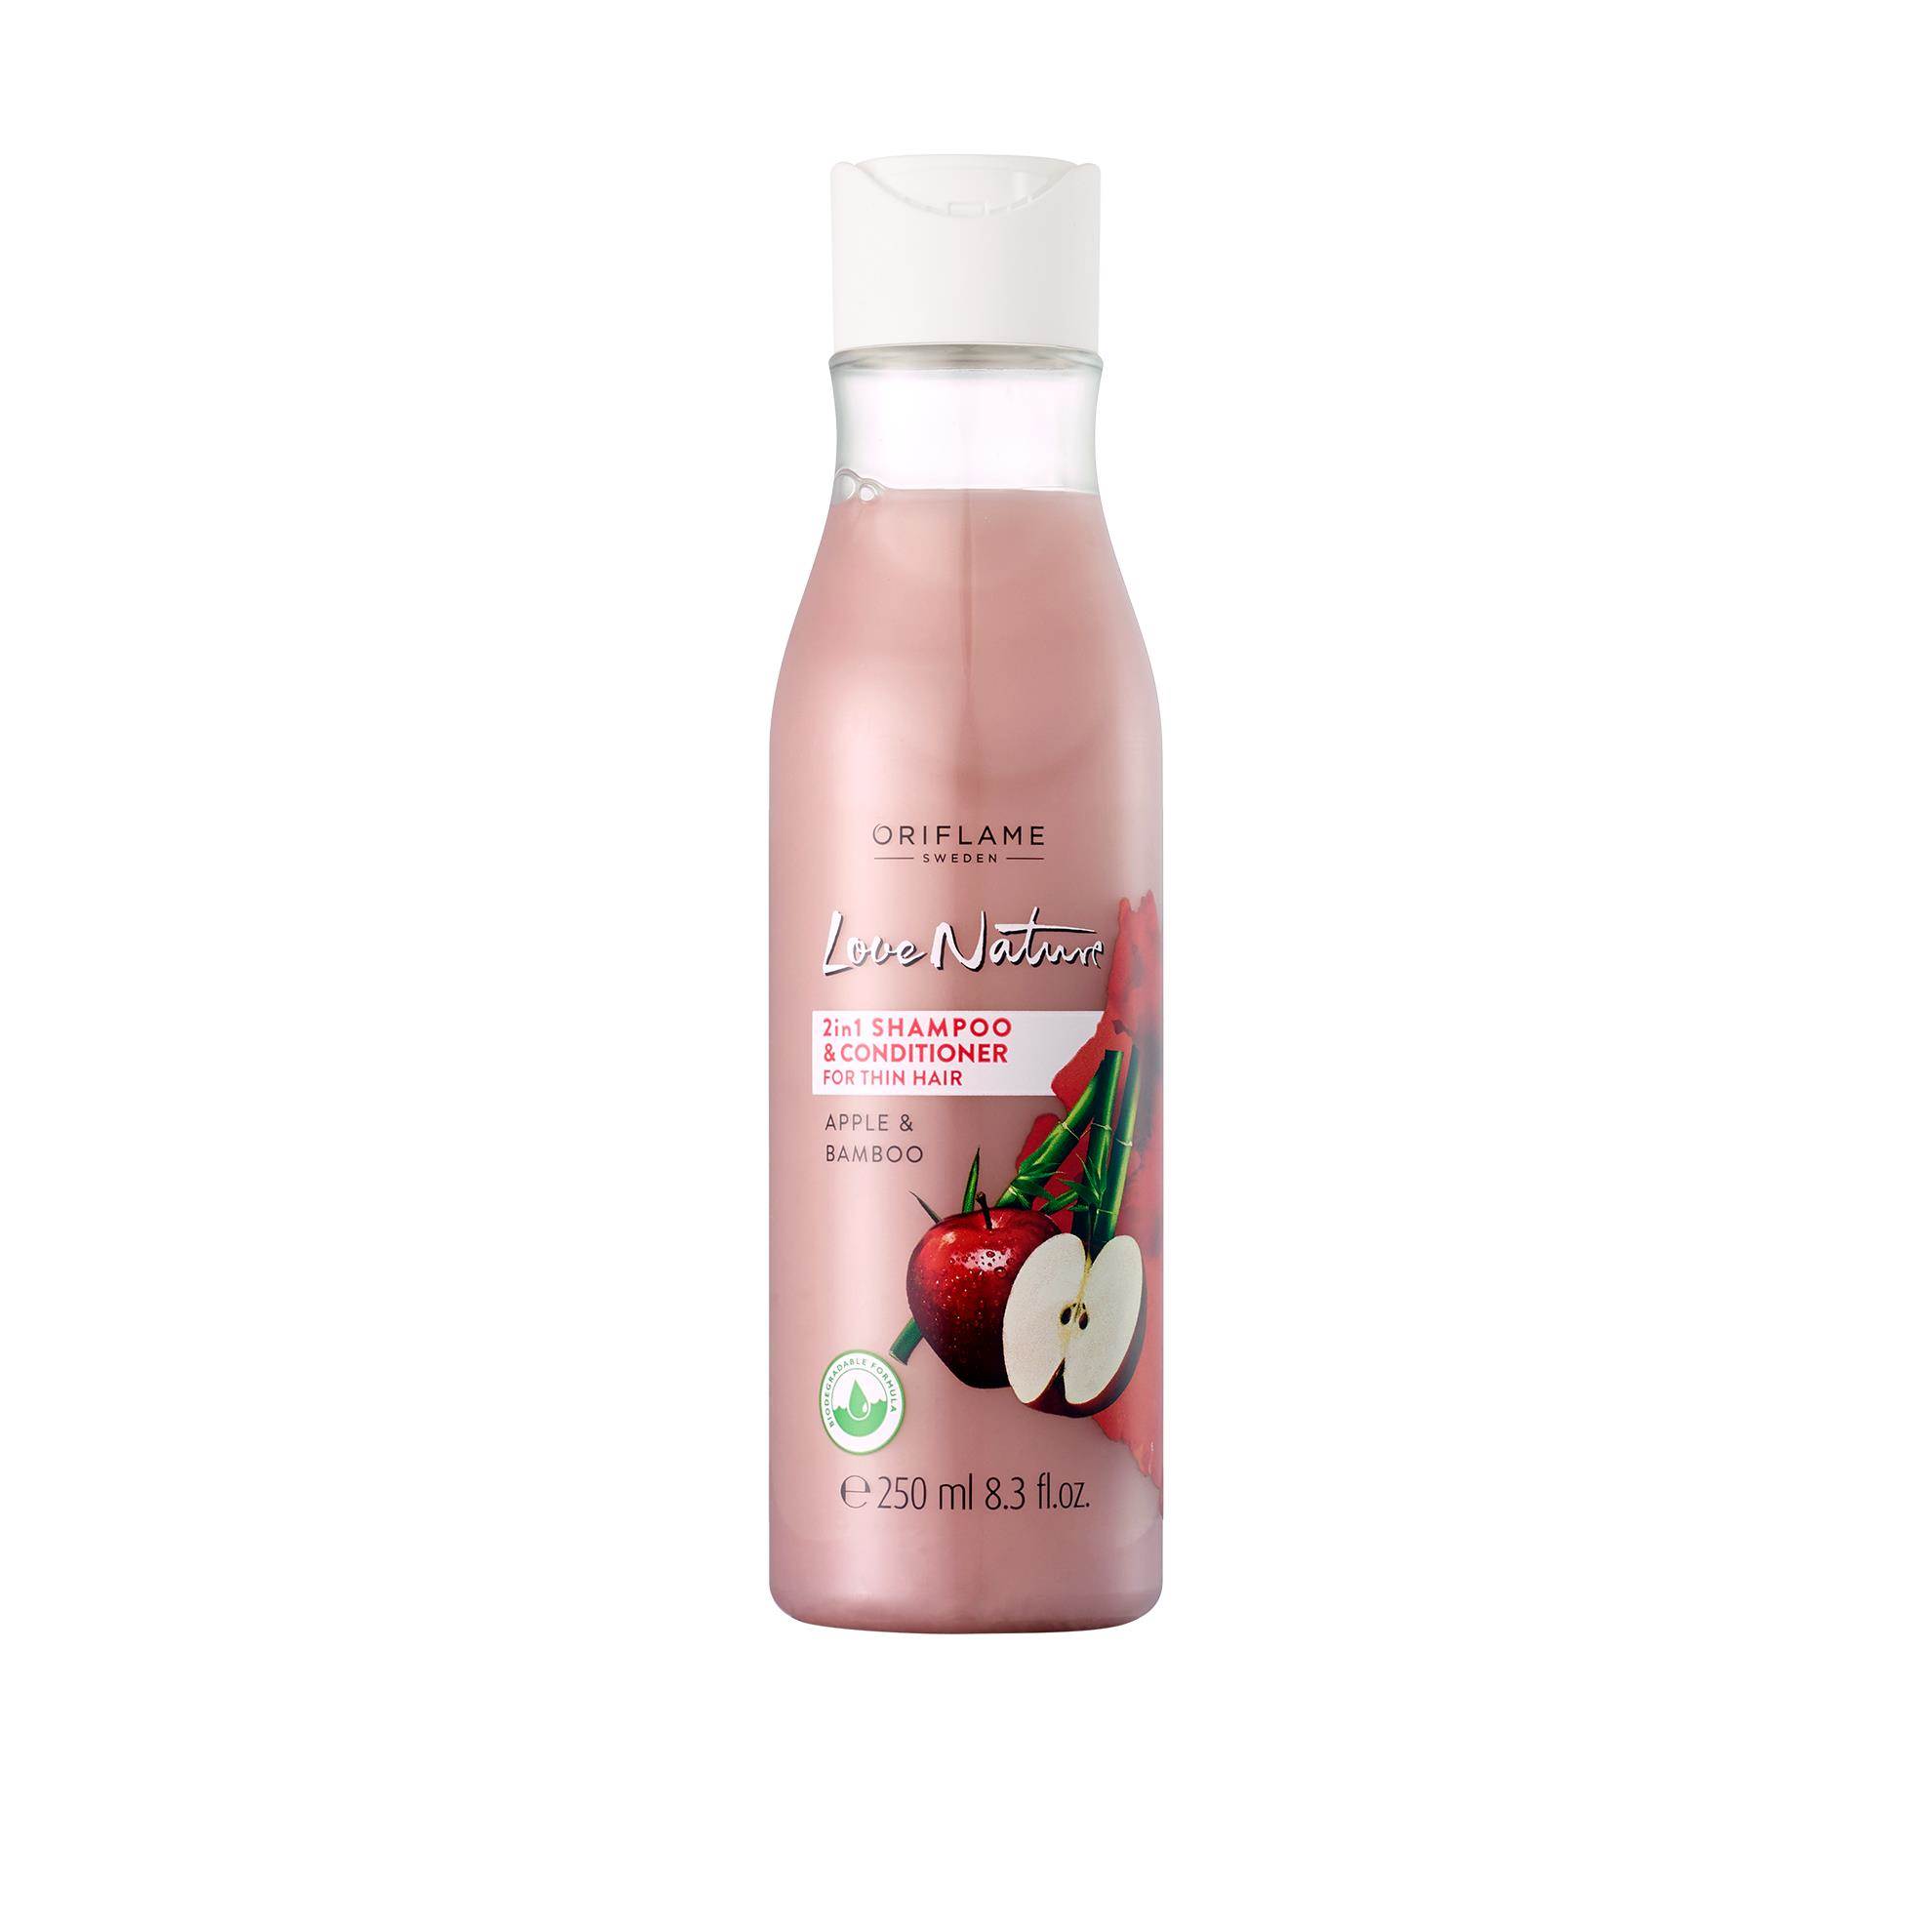 love-nature-2-in-1-shampoo-conditioner-for-thin-hair-apple-bamboo